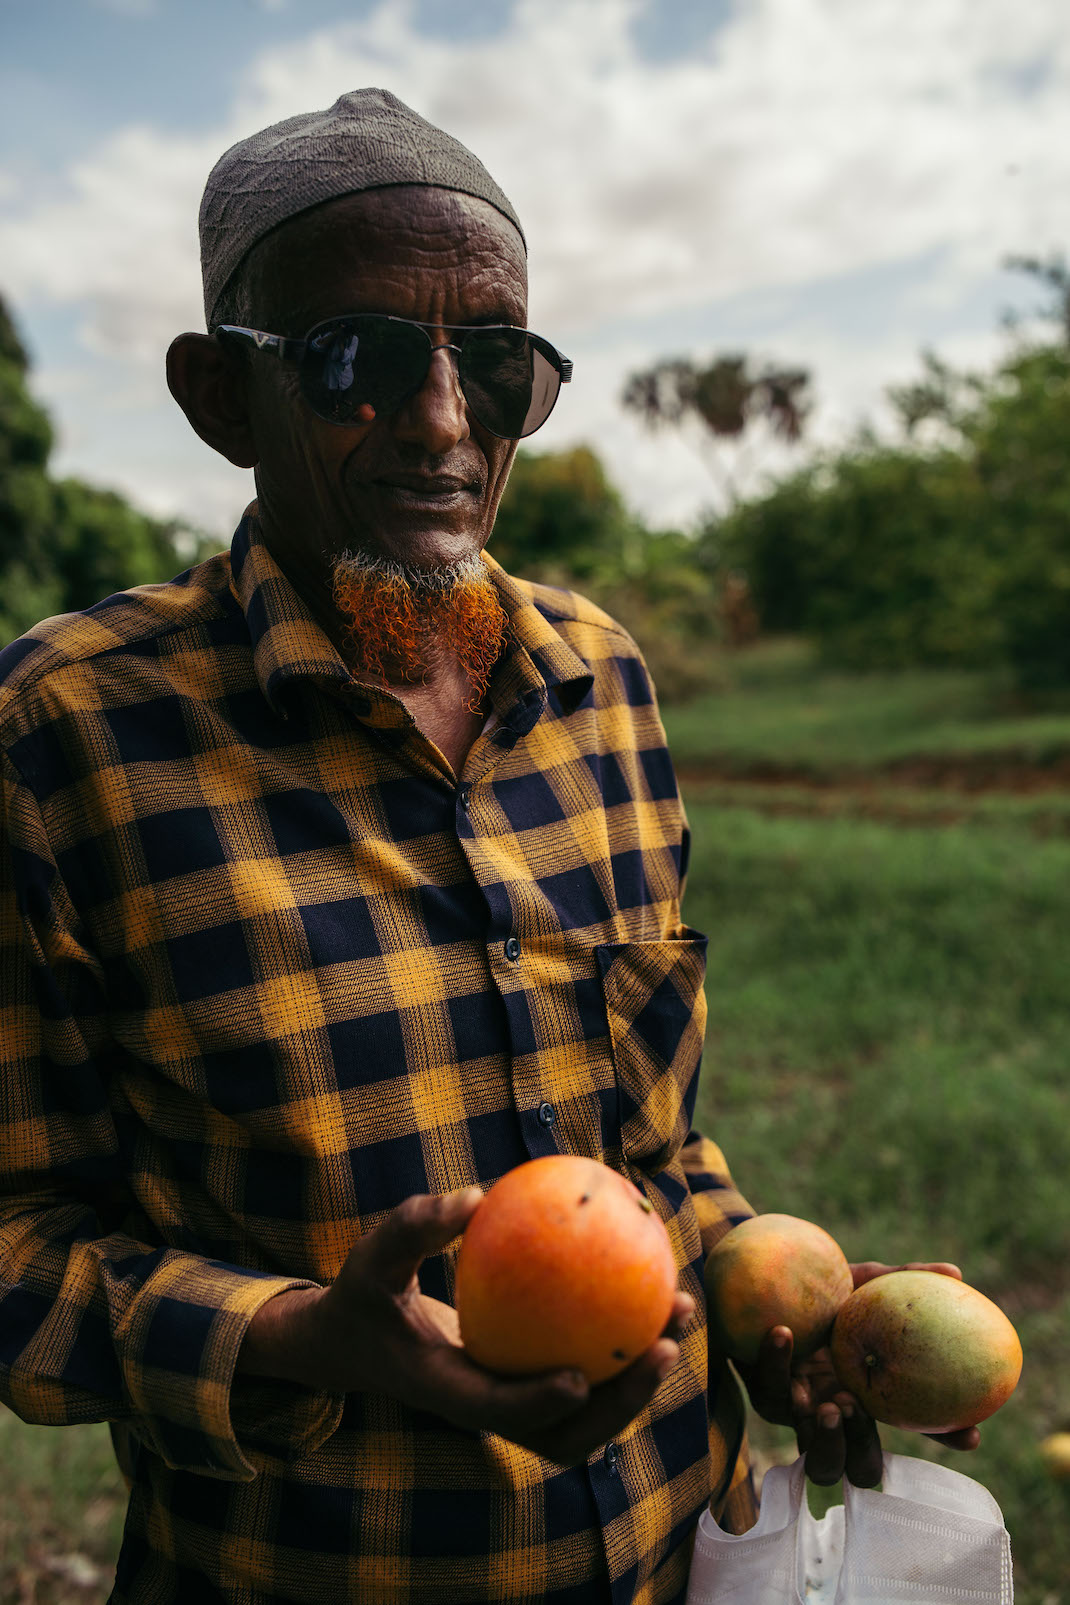 a man in a plaid shirt holds mangoes. He is wearing sunglasses